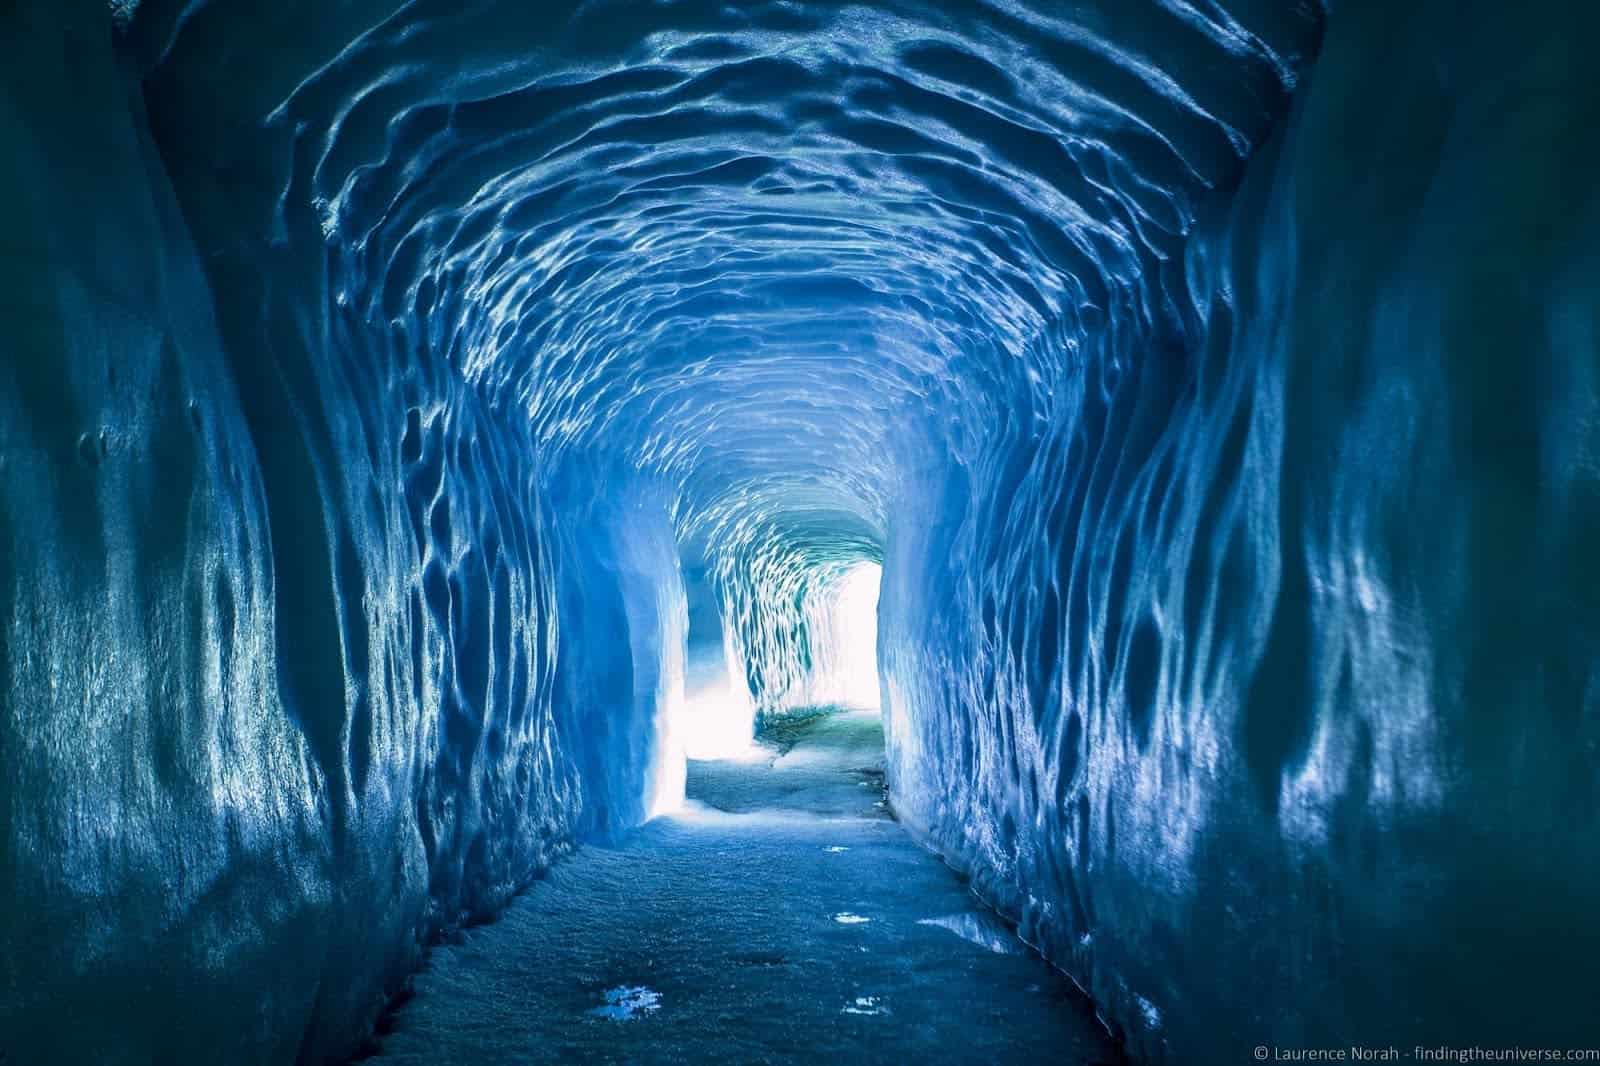 A path cuts its way through a glacier, creating an arched tunnel through the ice.